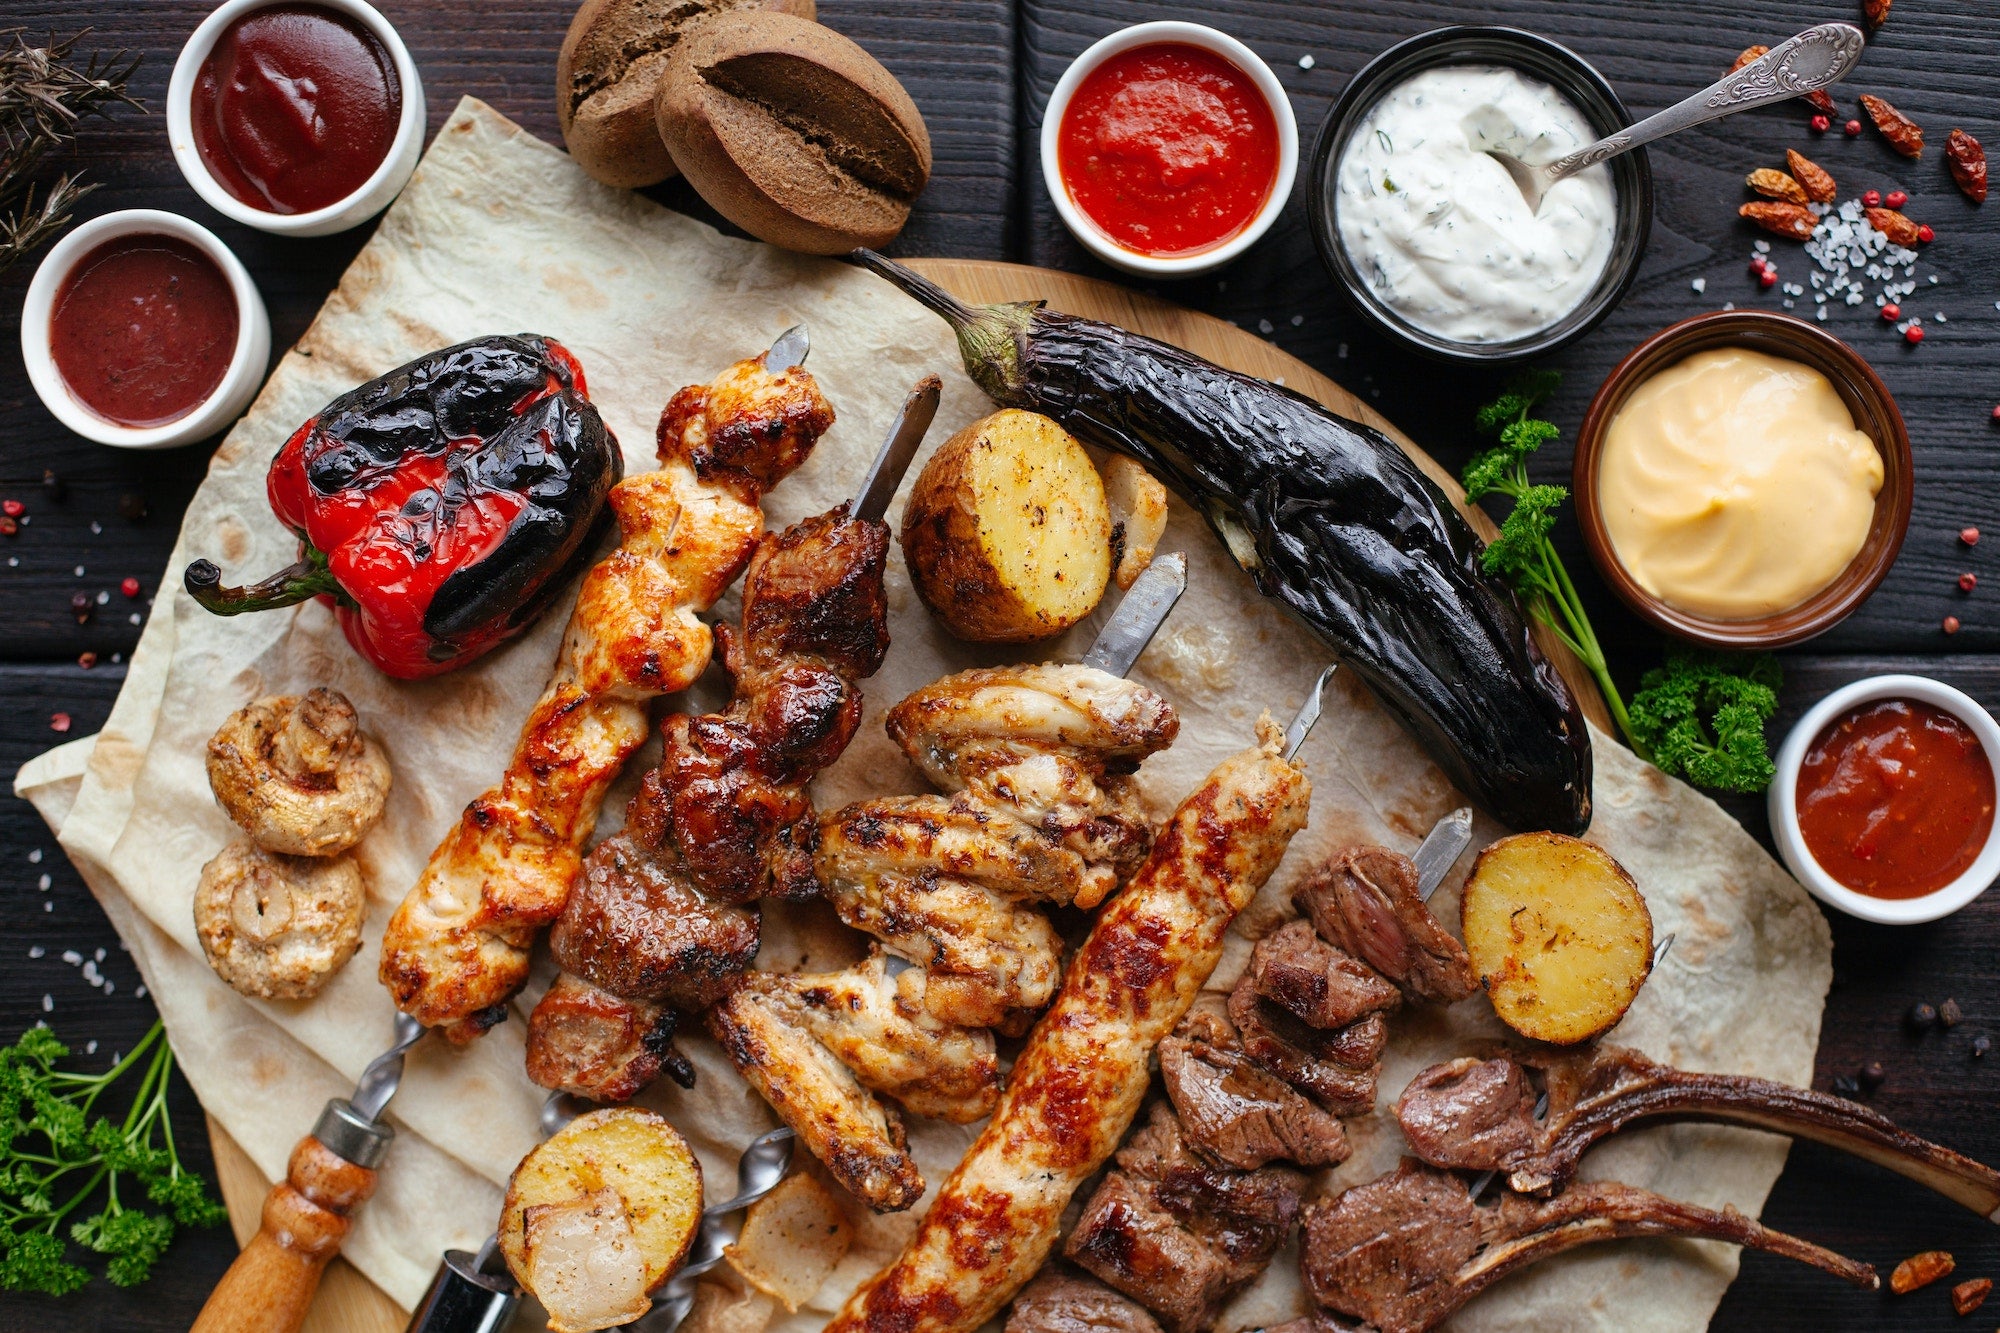 variety of grilled meats and veggies with sauces